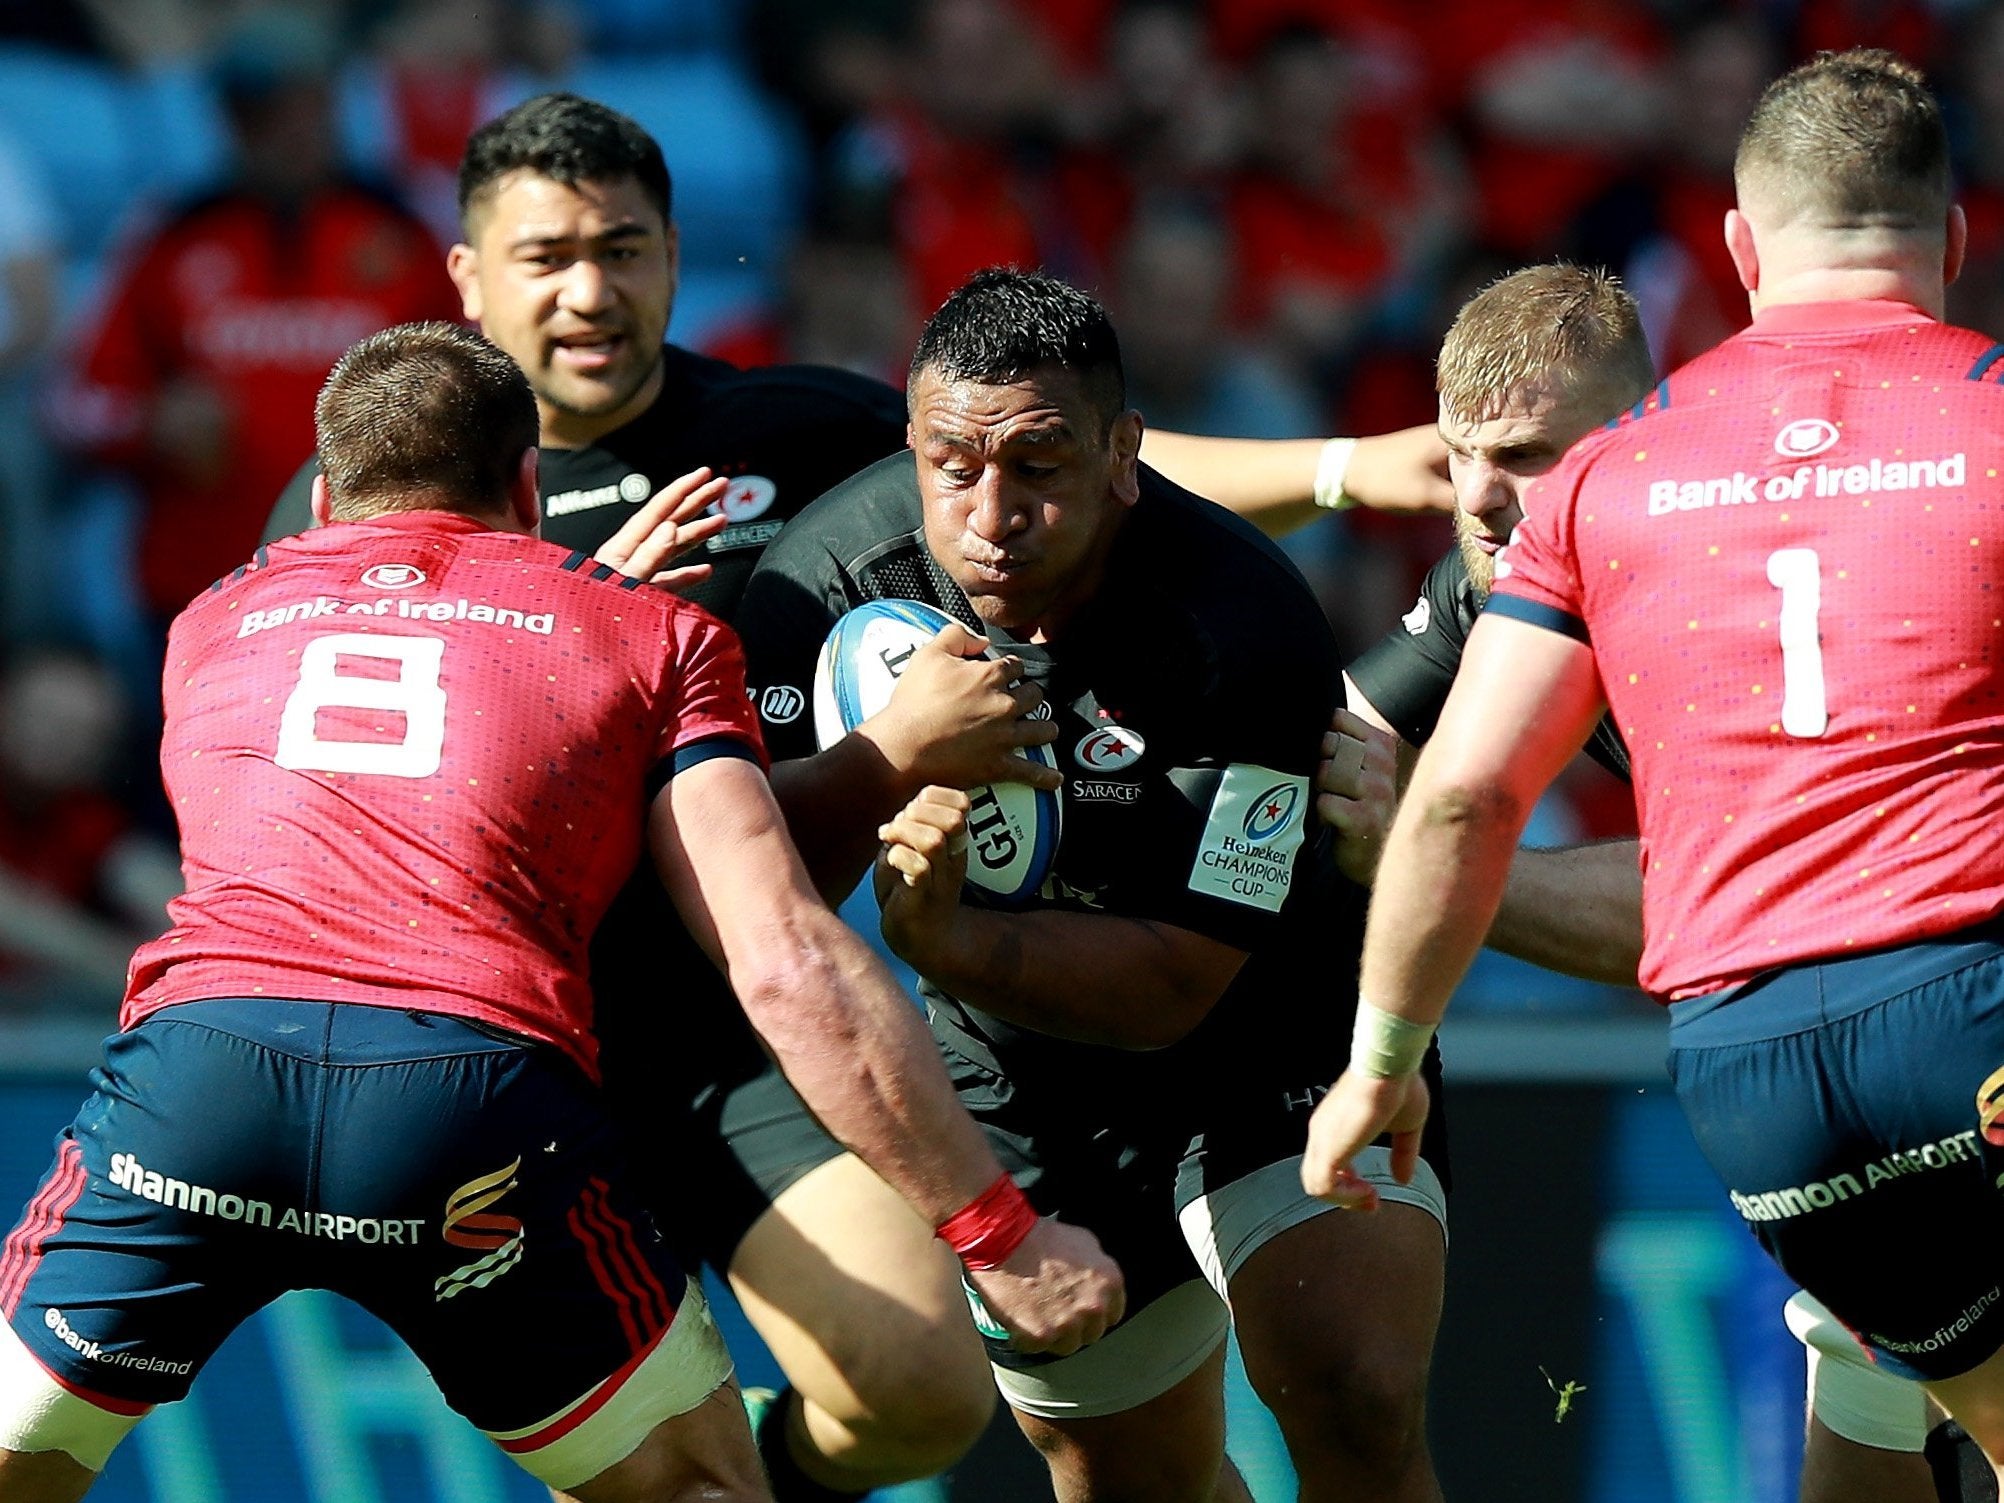 Mako Vunipola praised his brother Billy for his self-control in not reacting to Munster fans' boos